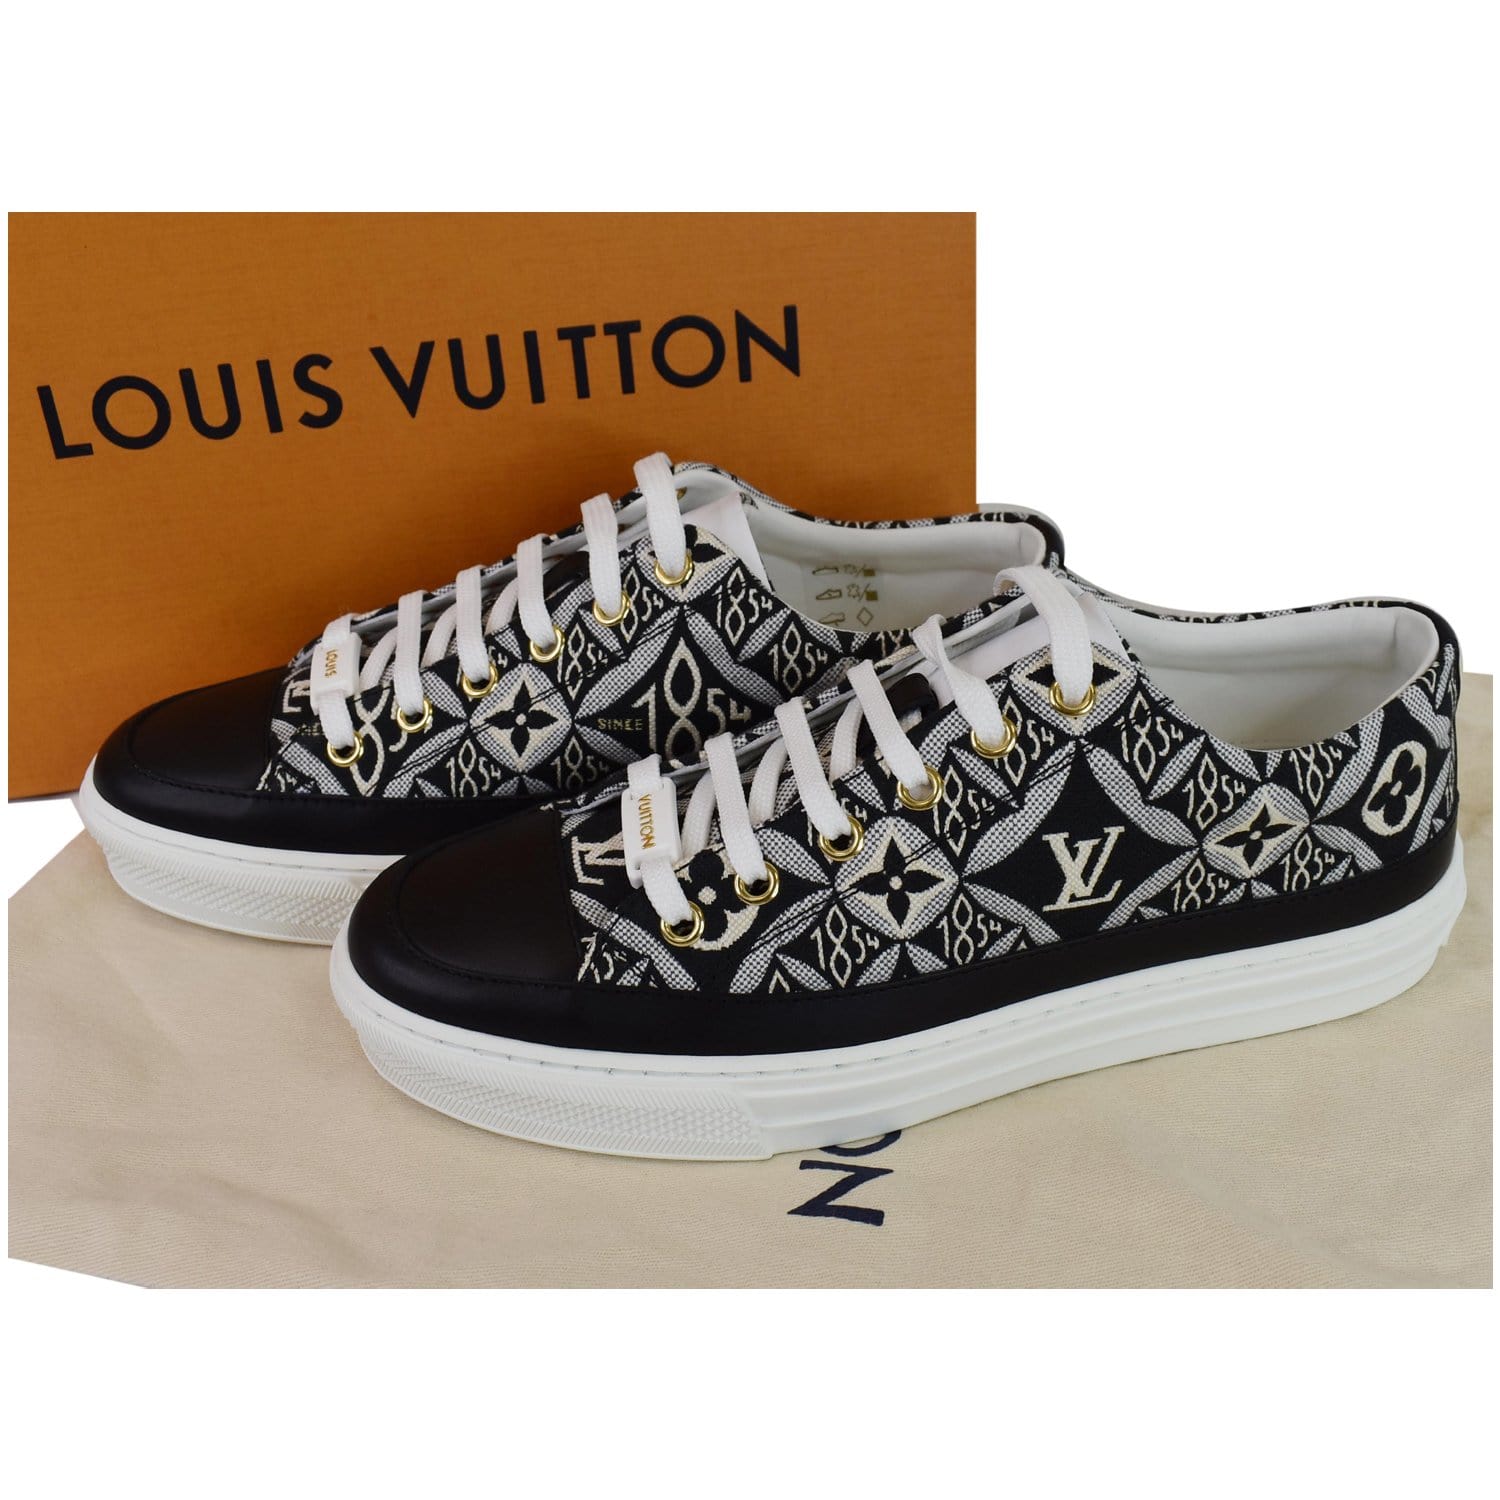 Luis Vuitton Sneaker Collection, Gallery posted by thisisbella